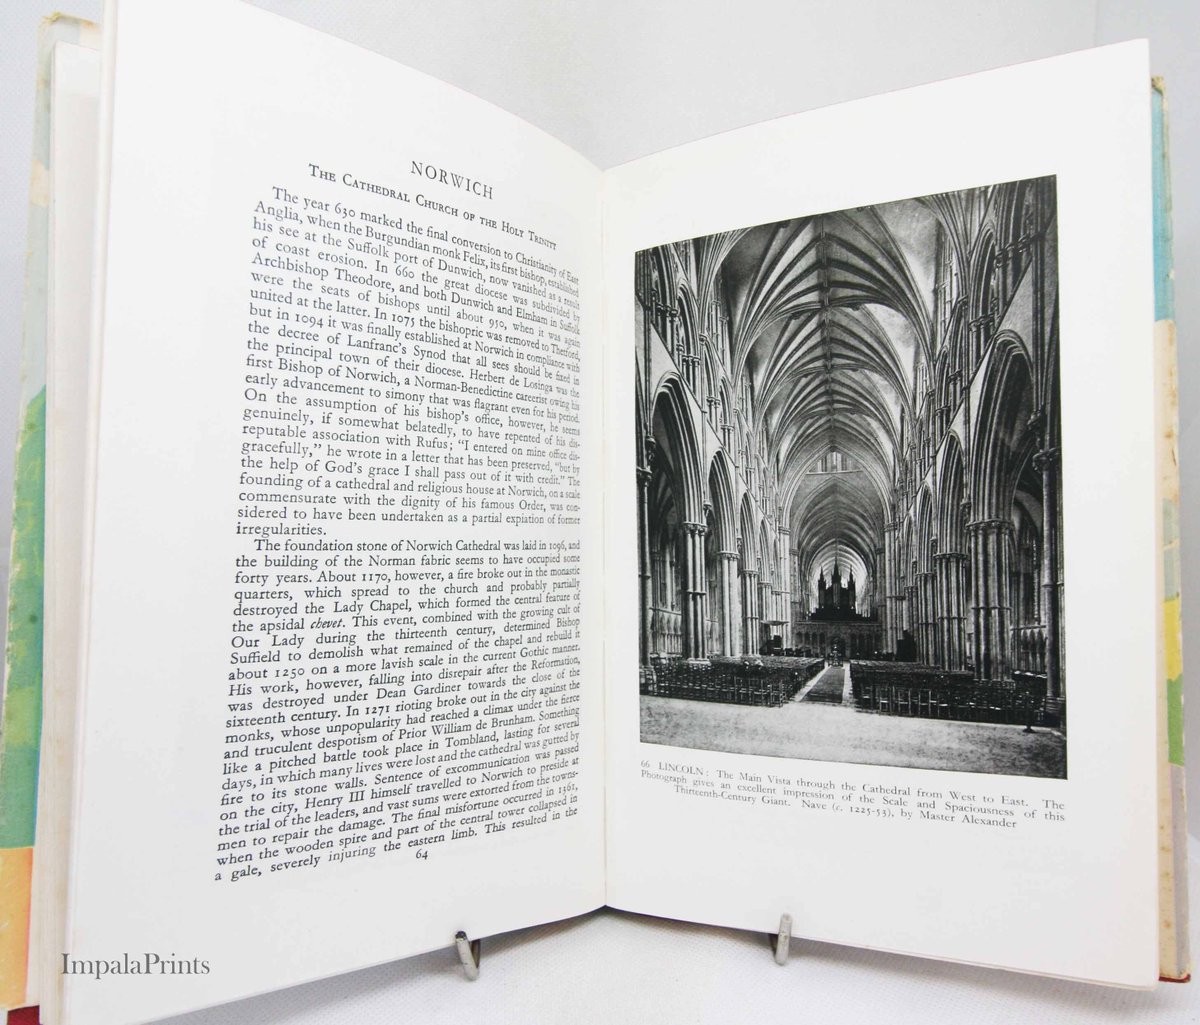 Cathedrals of England, Architecture History guide  etsy.me/316RlVU #vintagebook #antiquebook #architecture #architecturebook #architect #cathedralbook